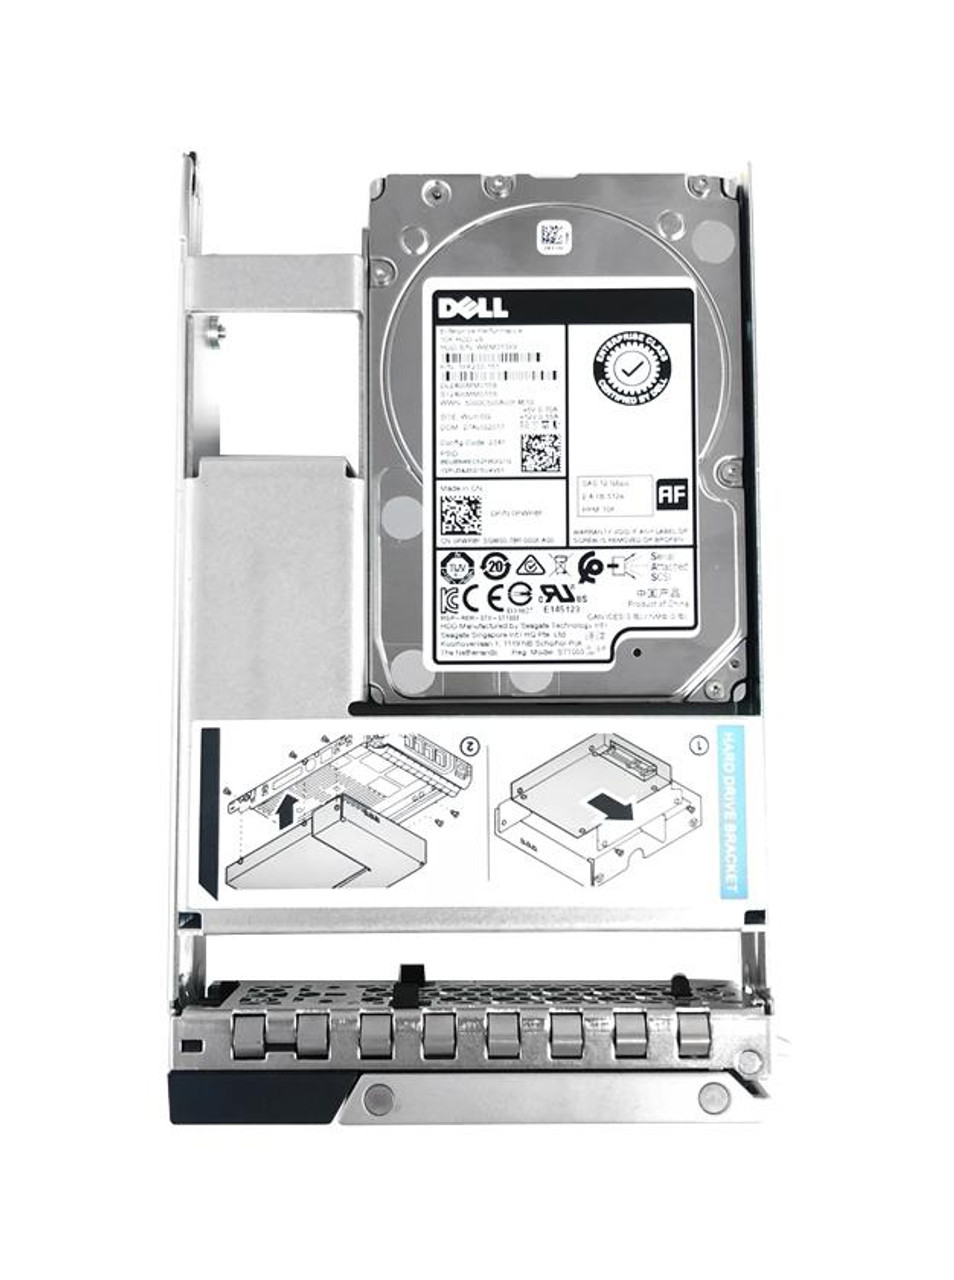 400-APGJ Dell 900GB 15000RPM SAS 12Gbps 2.5-inch Internal Hard Drive with 3.5-inch Hybrid Carrier